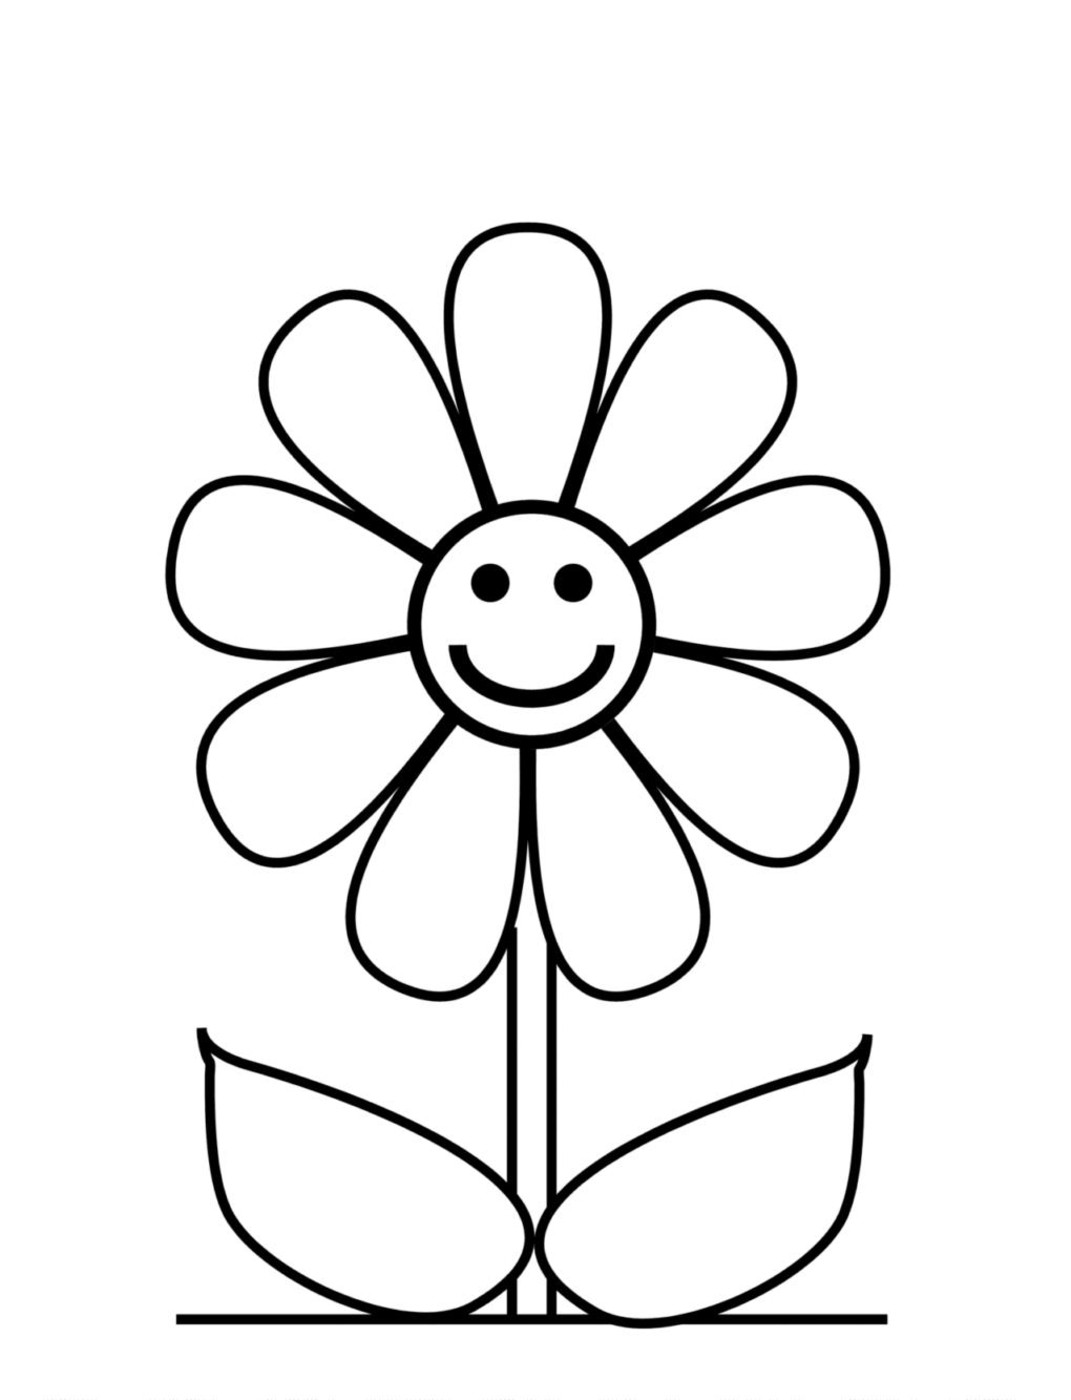 Coloring Pages Of A Single Flower - Google Twit